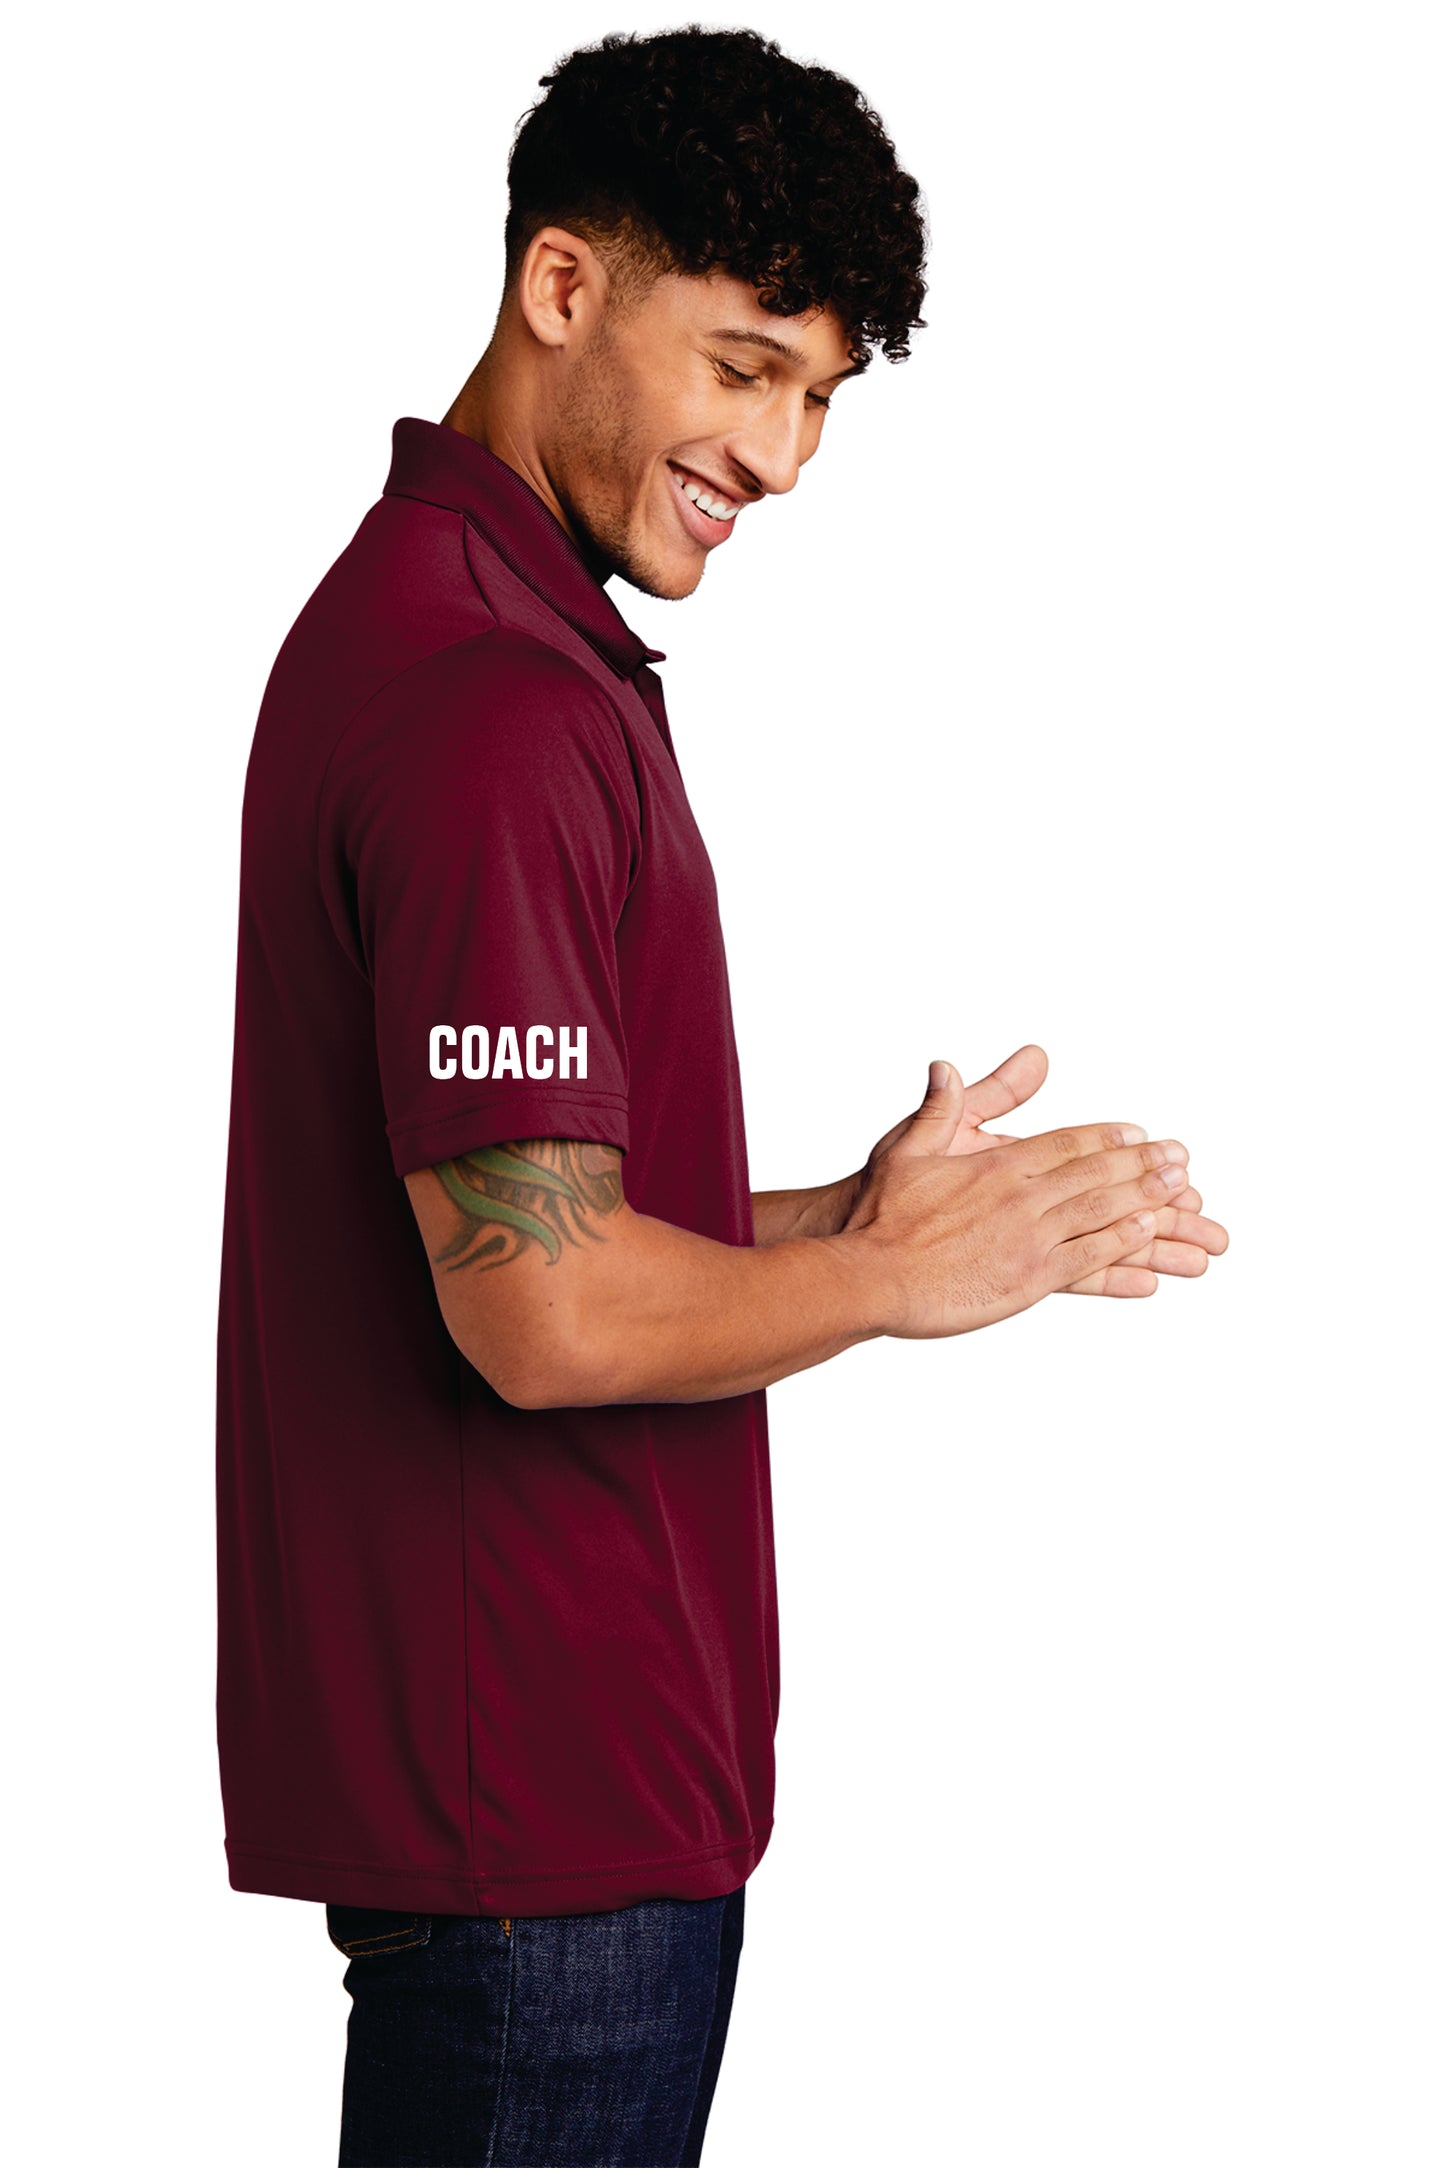 Westford Youth Soccer Coach's Polo Shirt